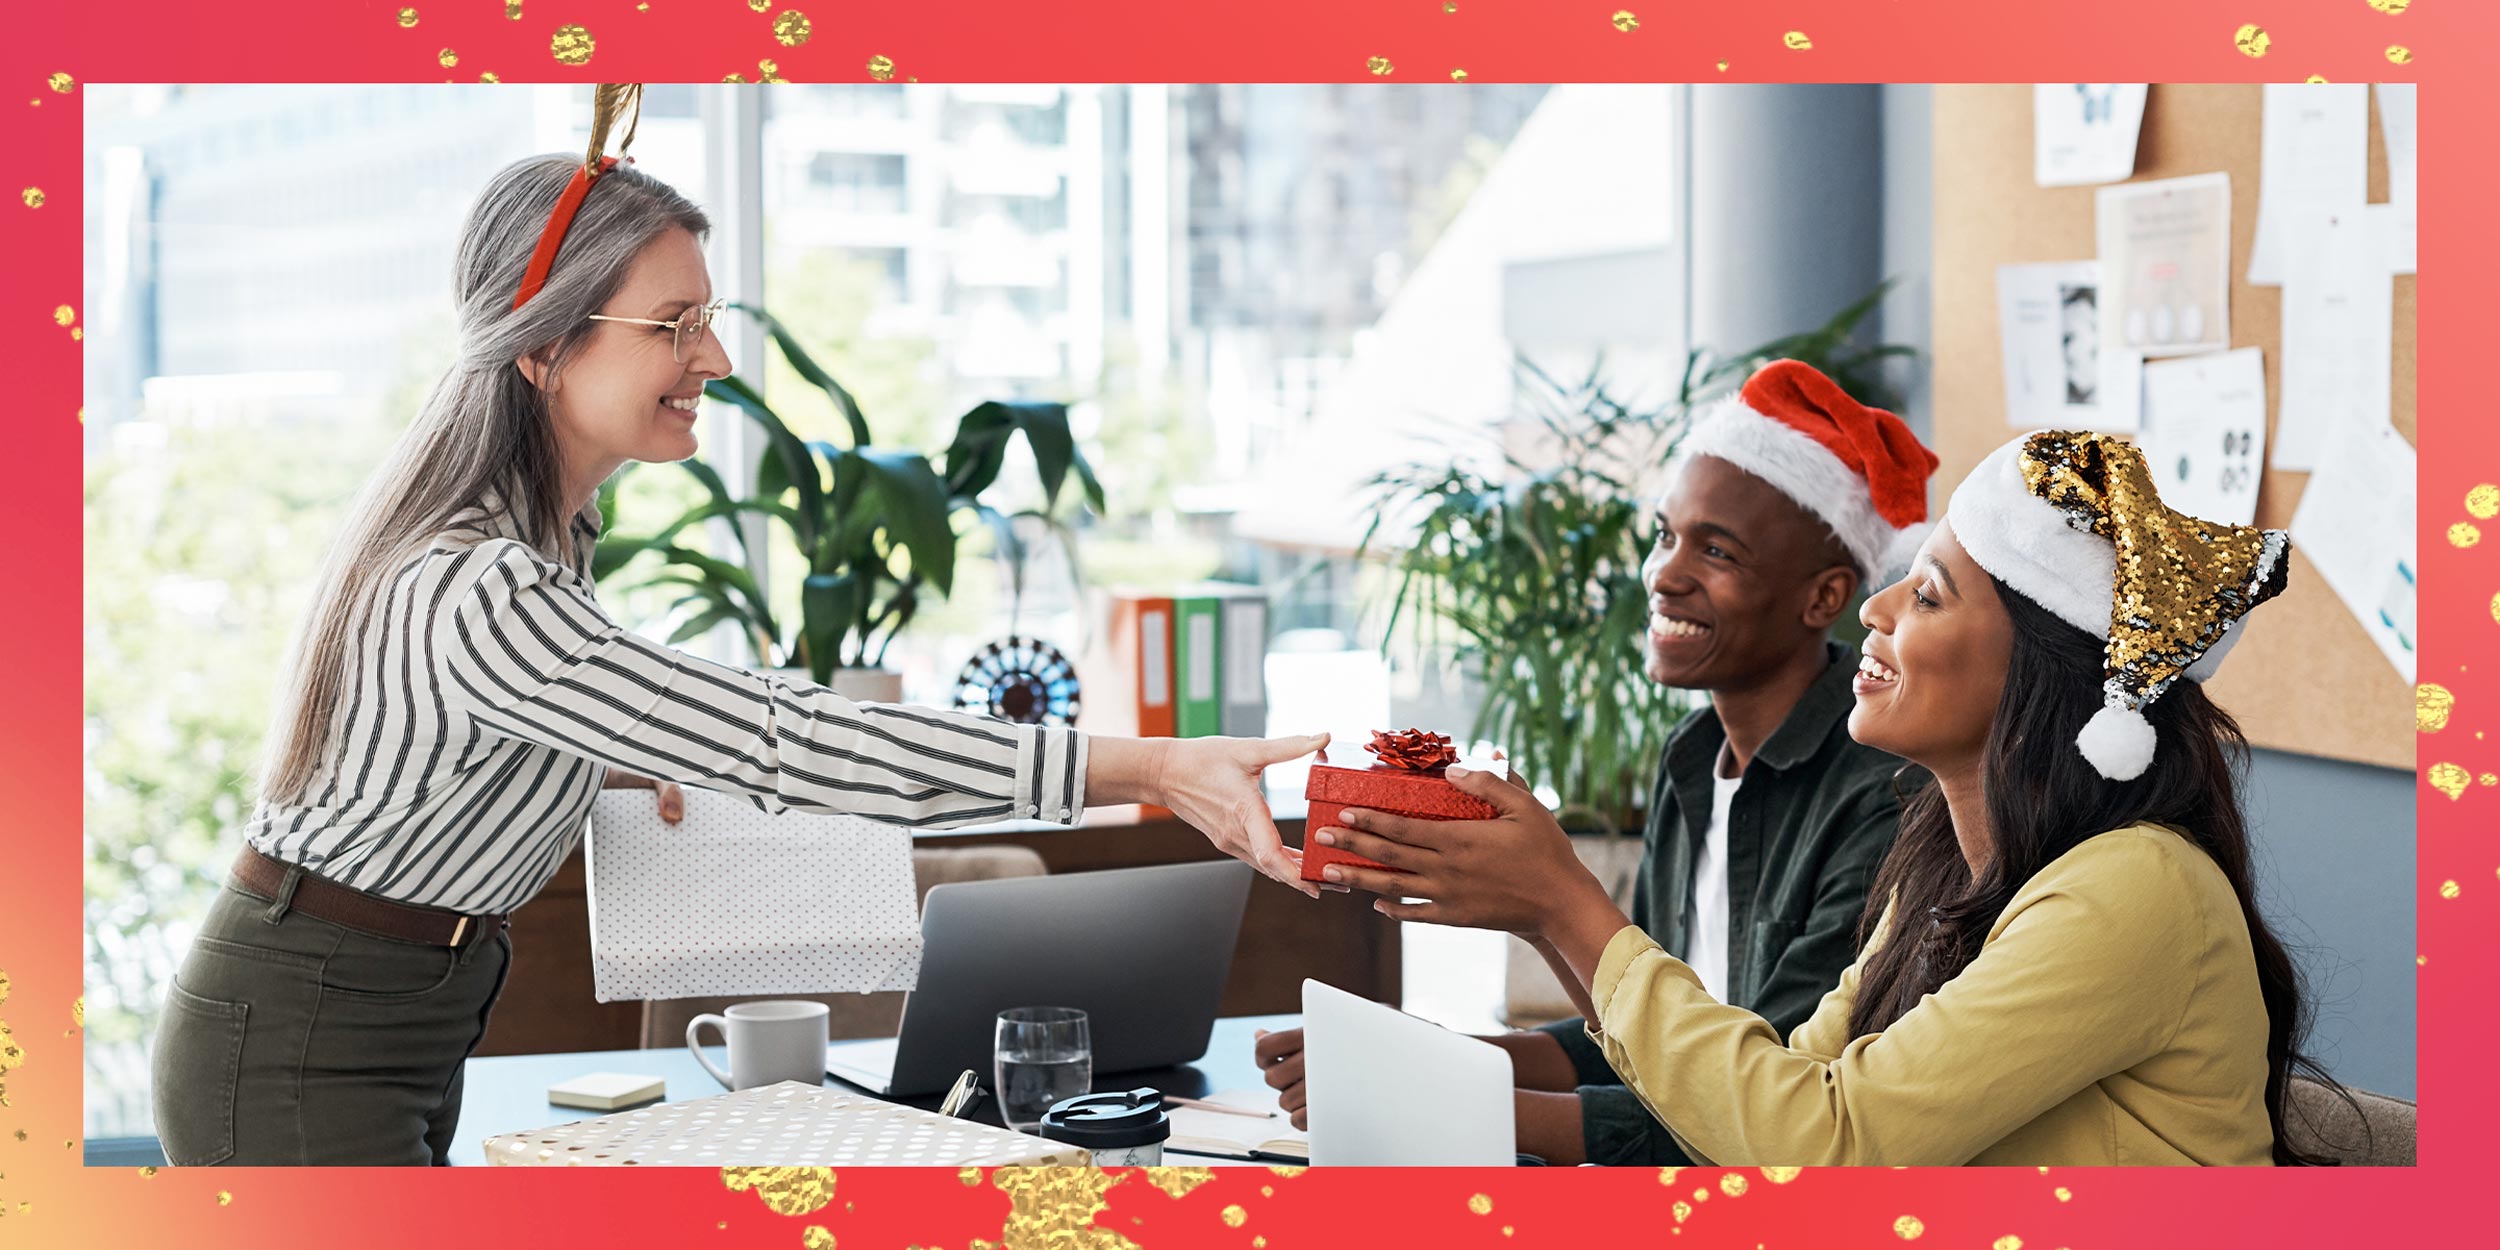 Top 15 Unique Christmas Gift Ideas For Coworkers Under $10